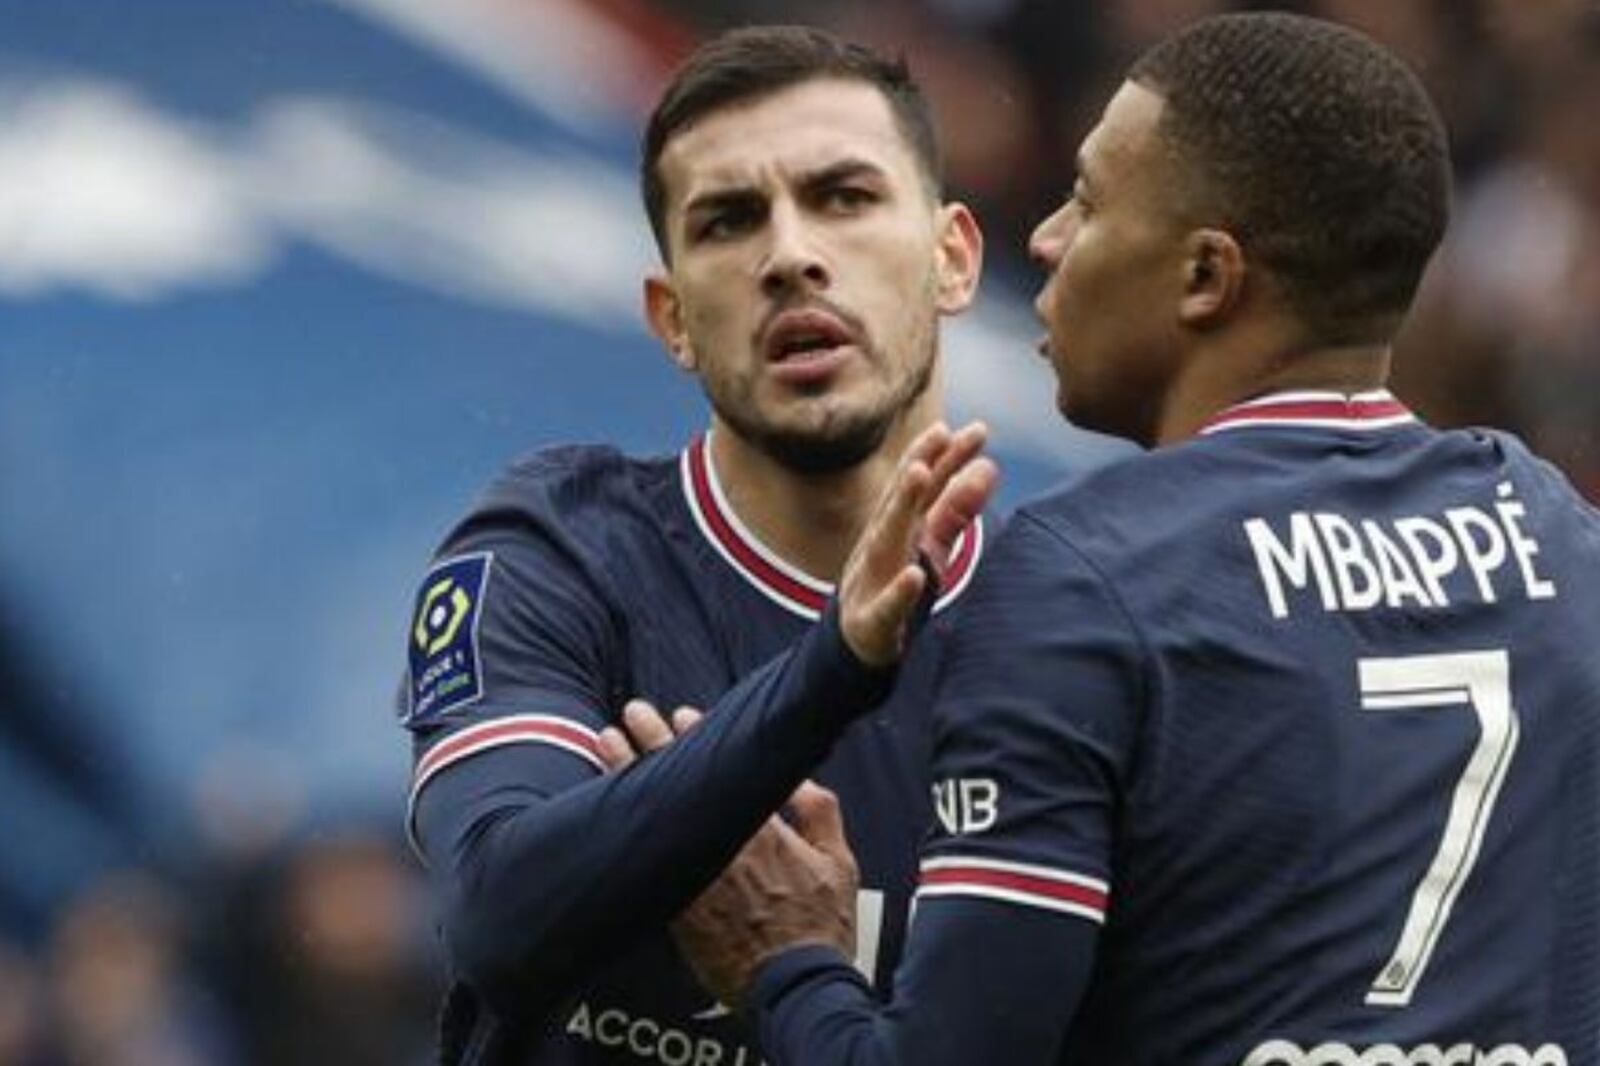 Leandro Paredes' unexpected response on what Kylian Mbappé is like at PSG